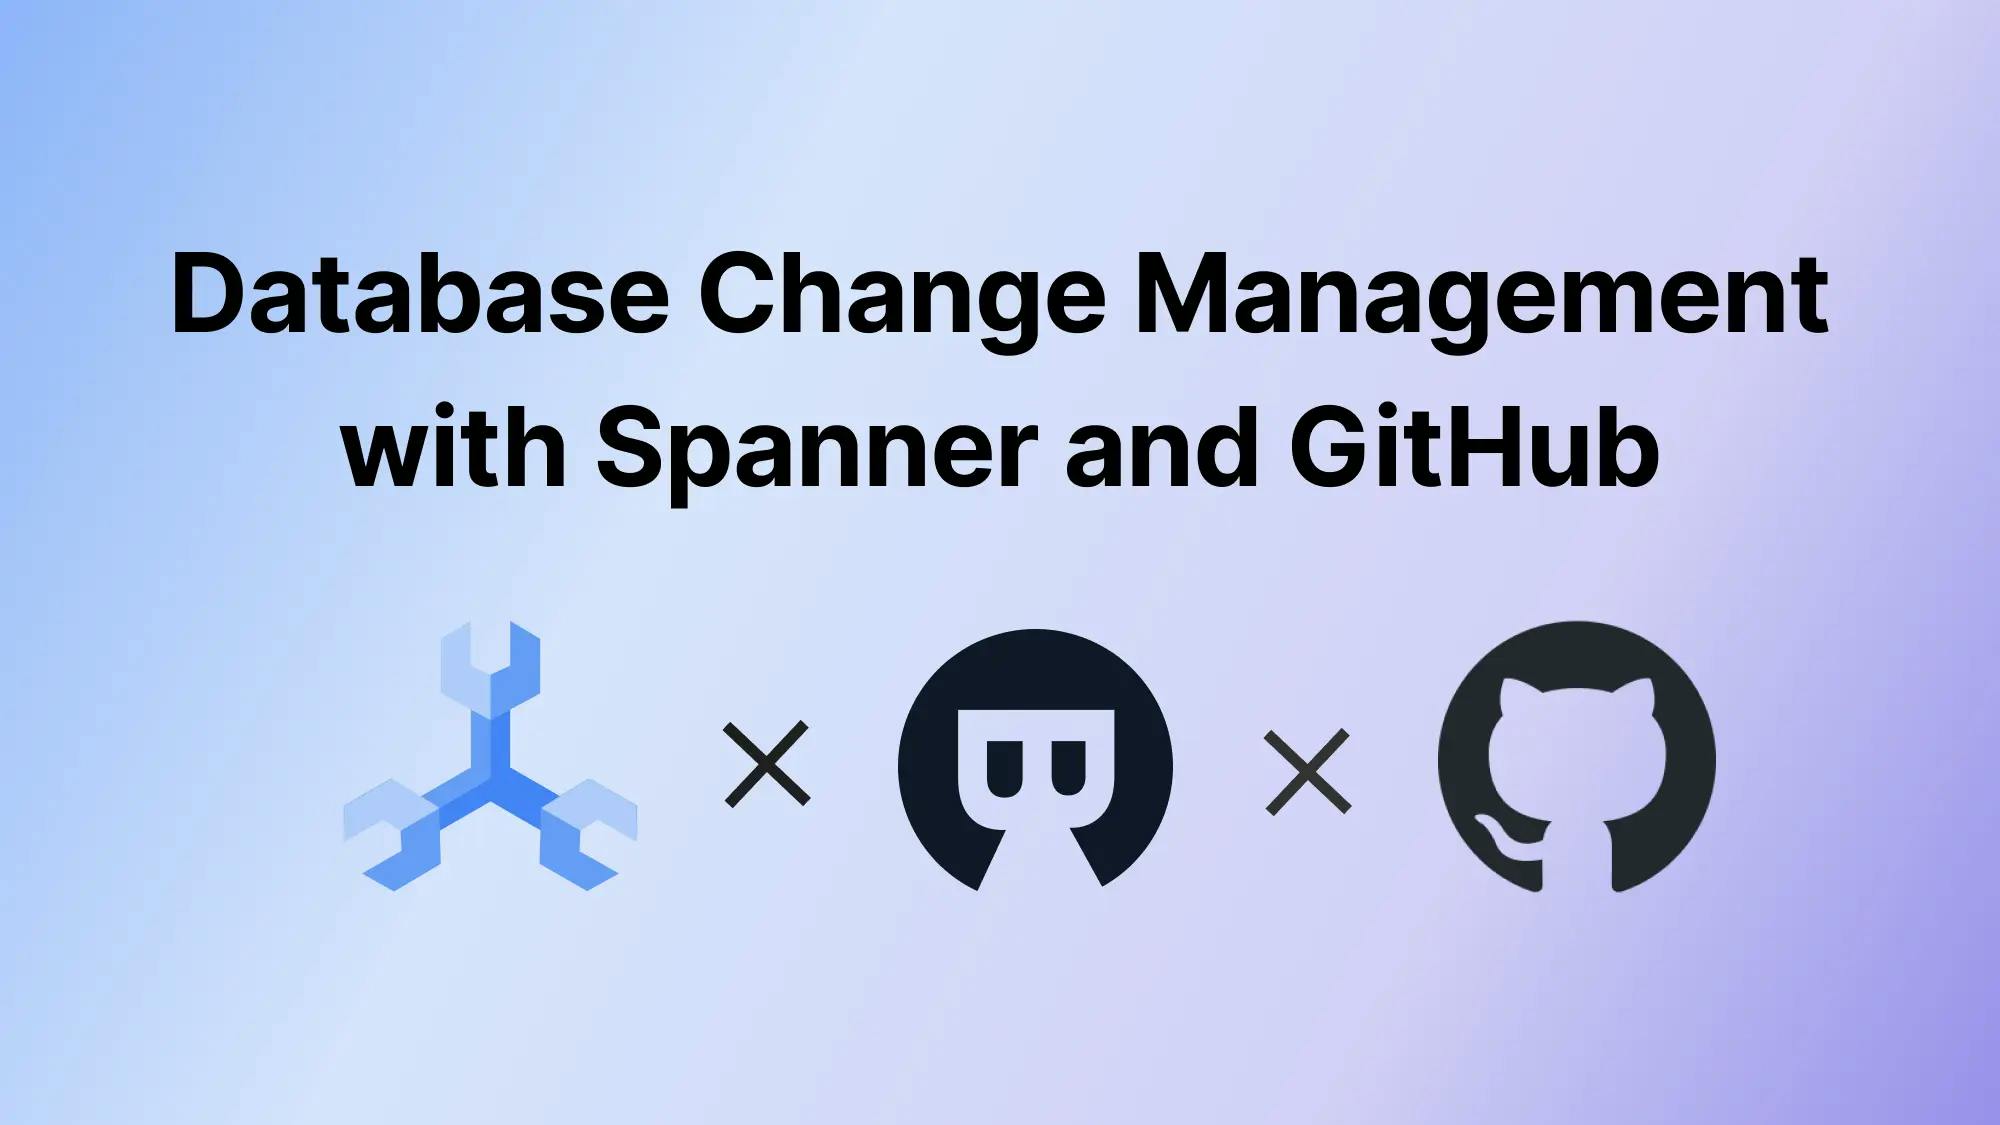 Database Change Management with Spanner and GitHub